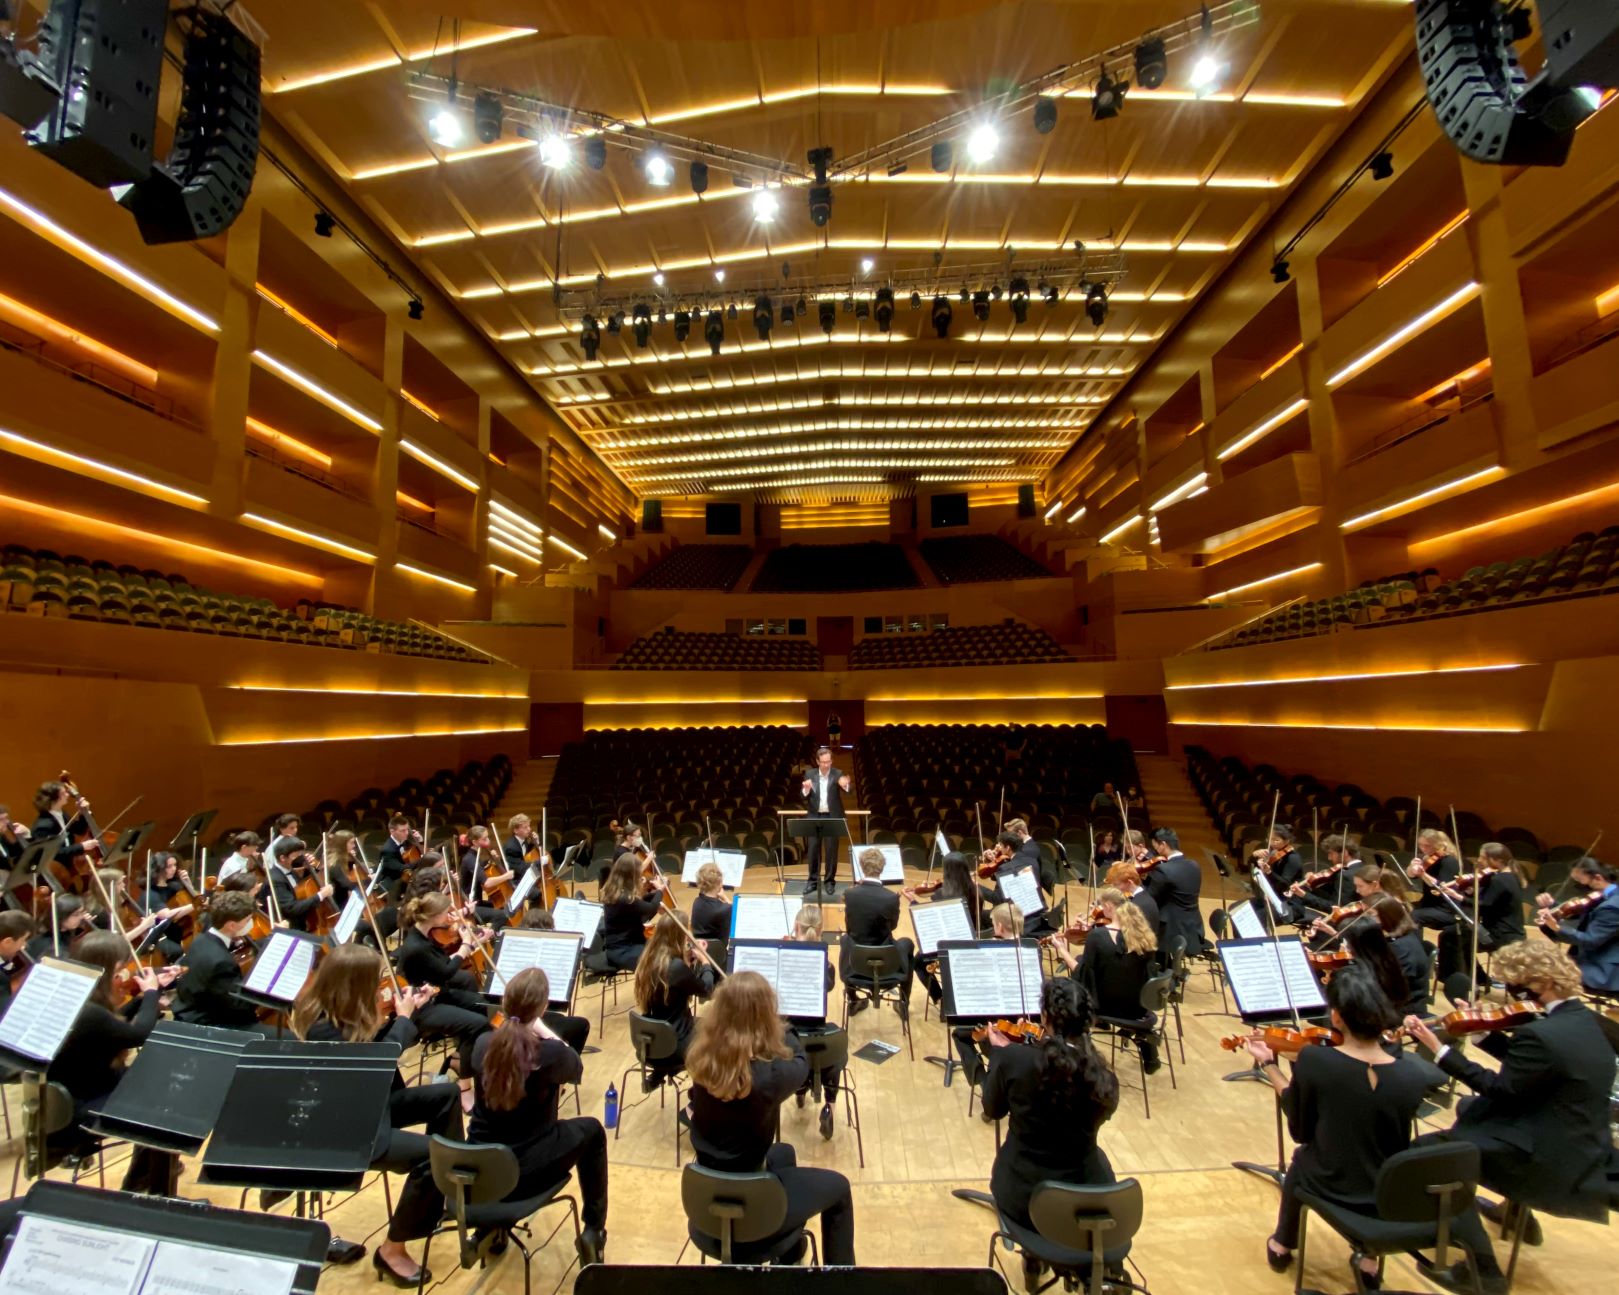 SJHS Orchestra at L’auditori in Barcelona, Spain